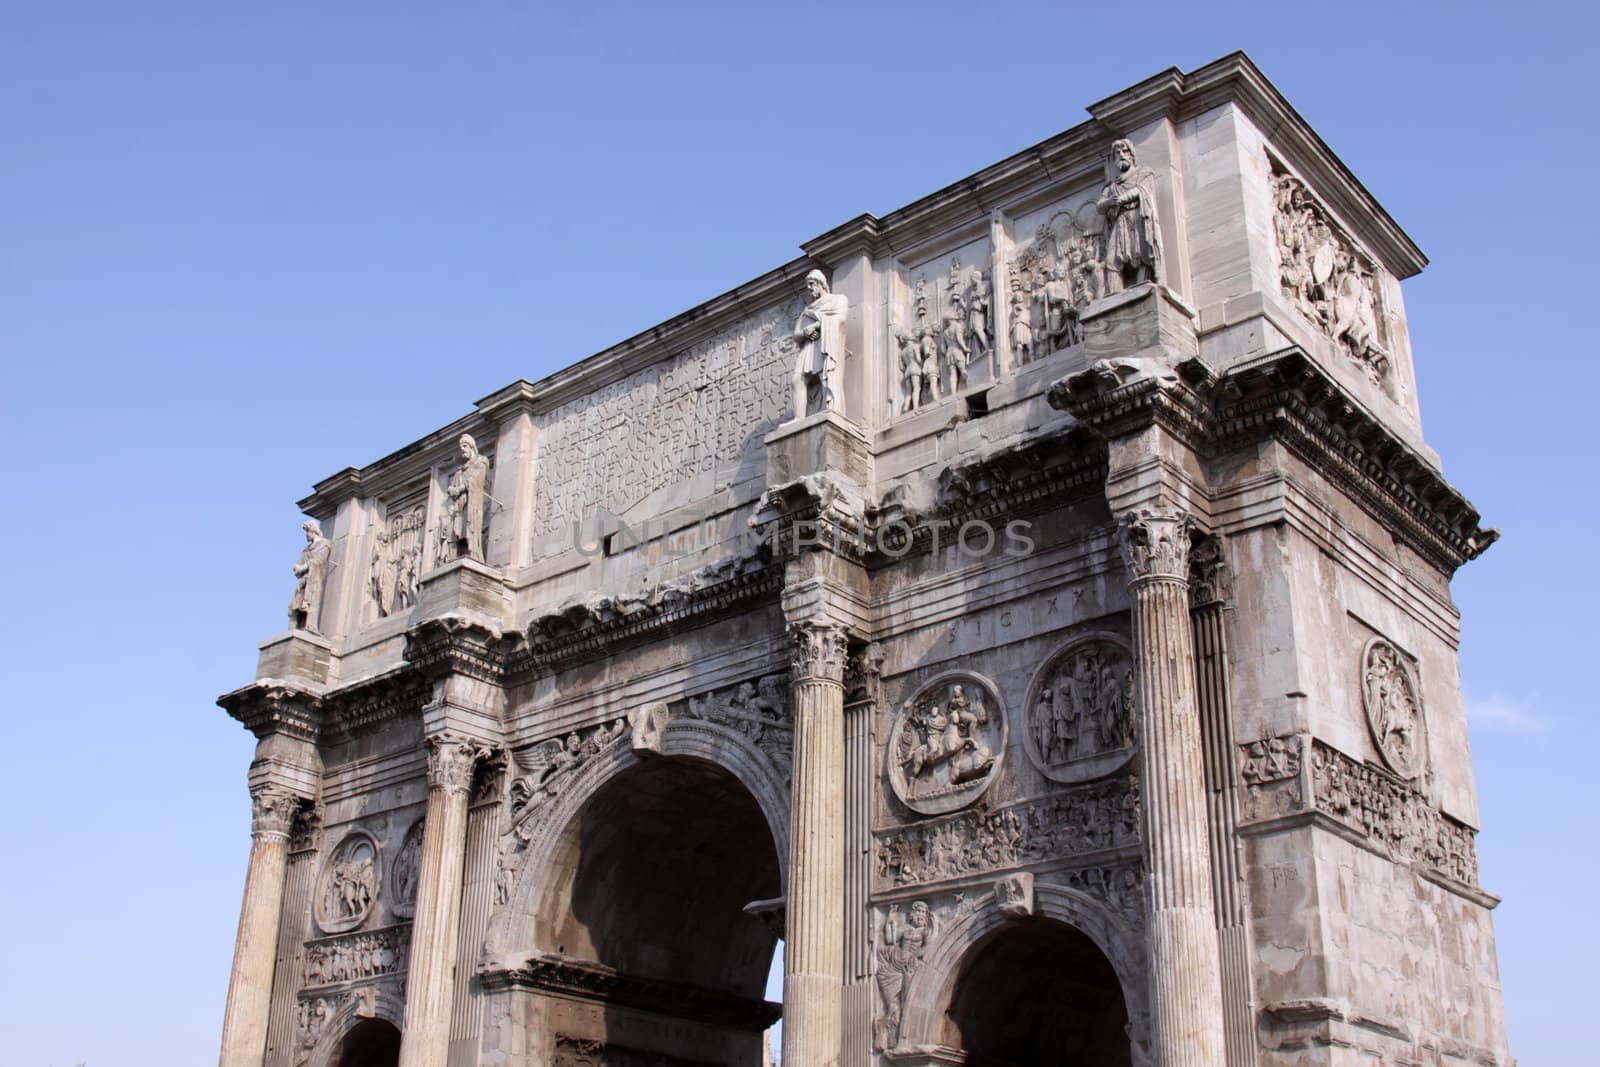 Arch of Constantine by ca2hill